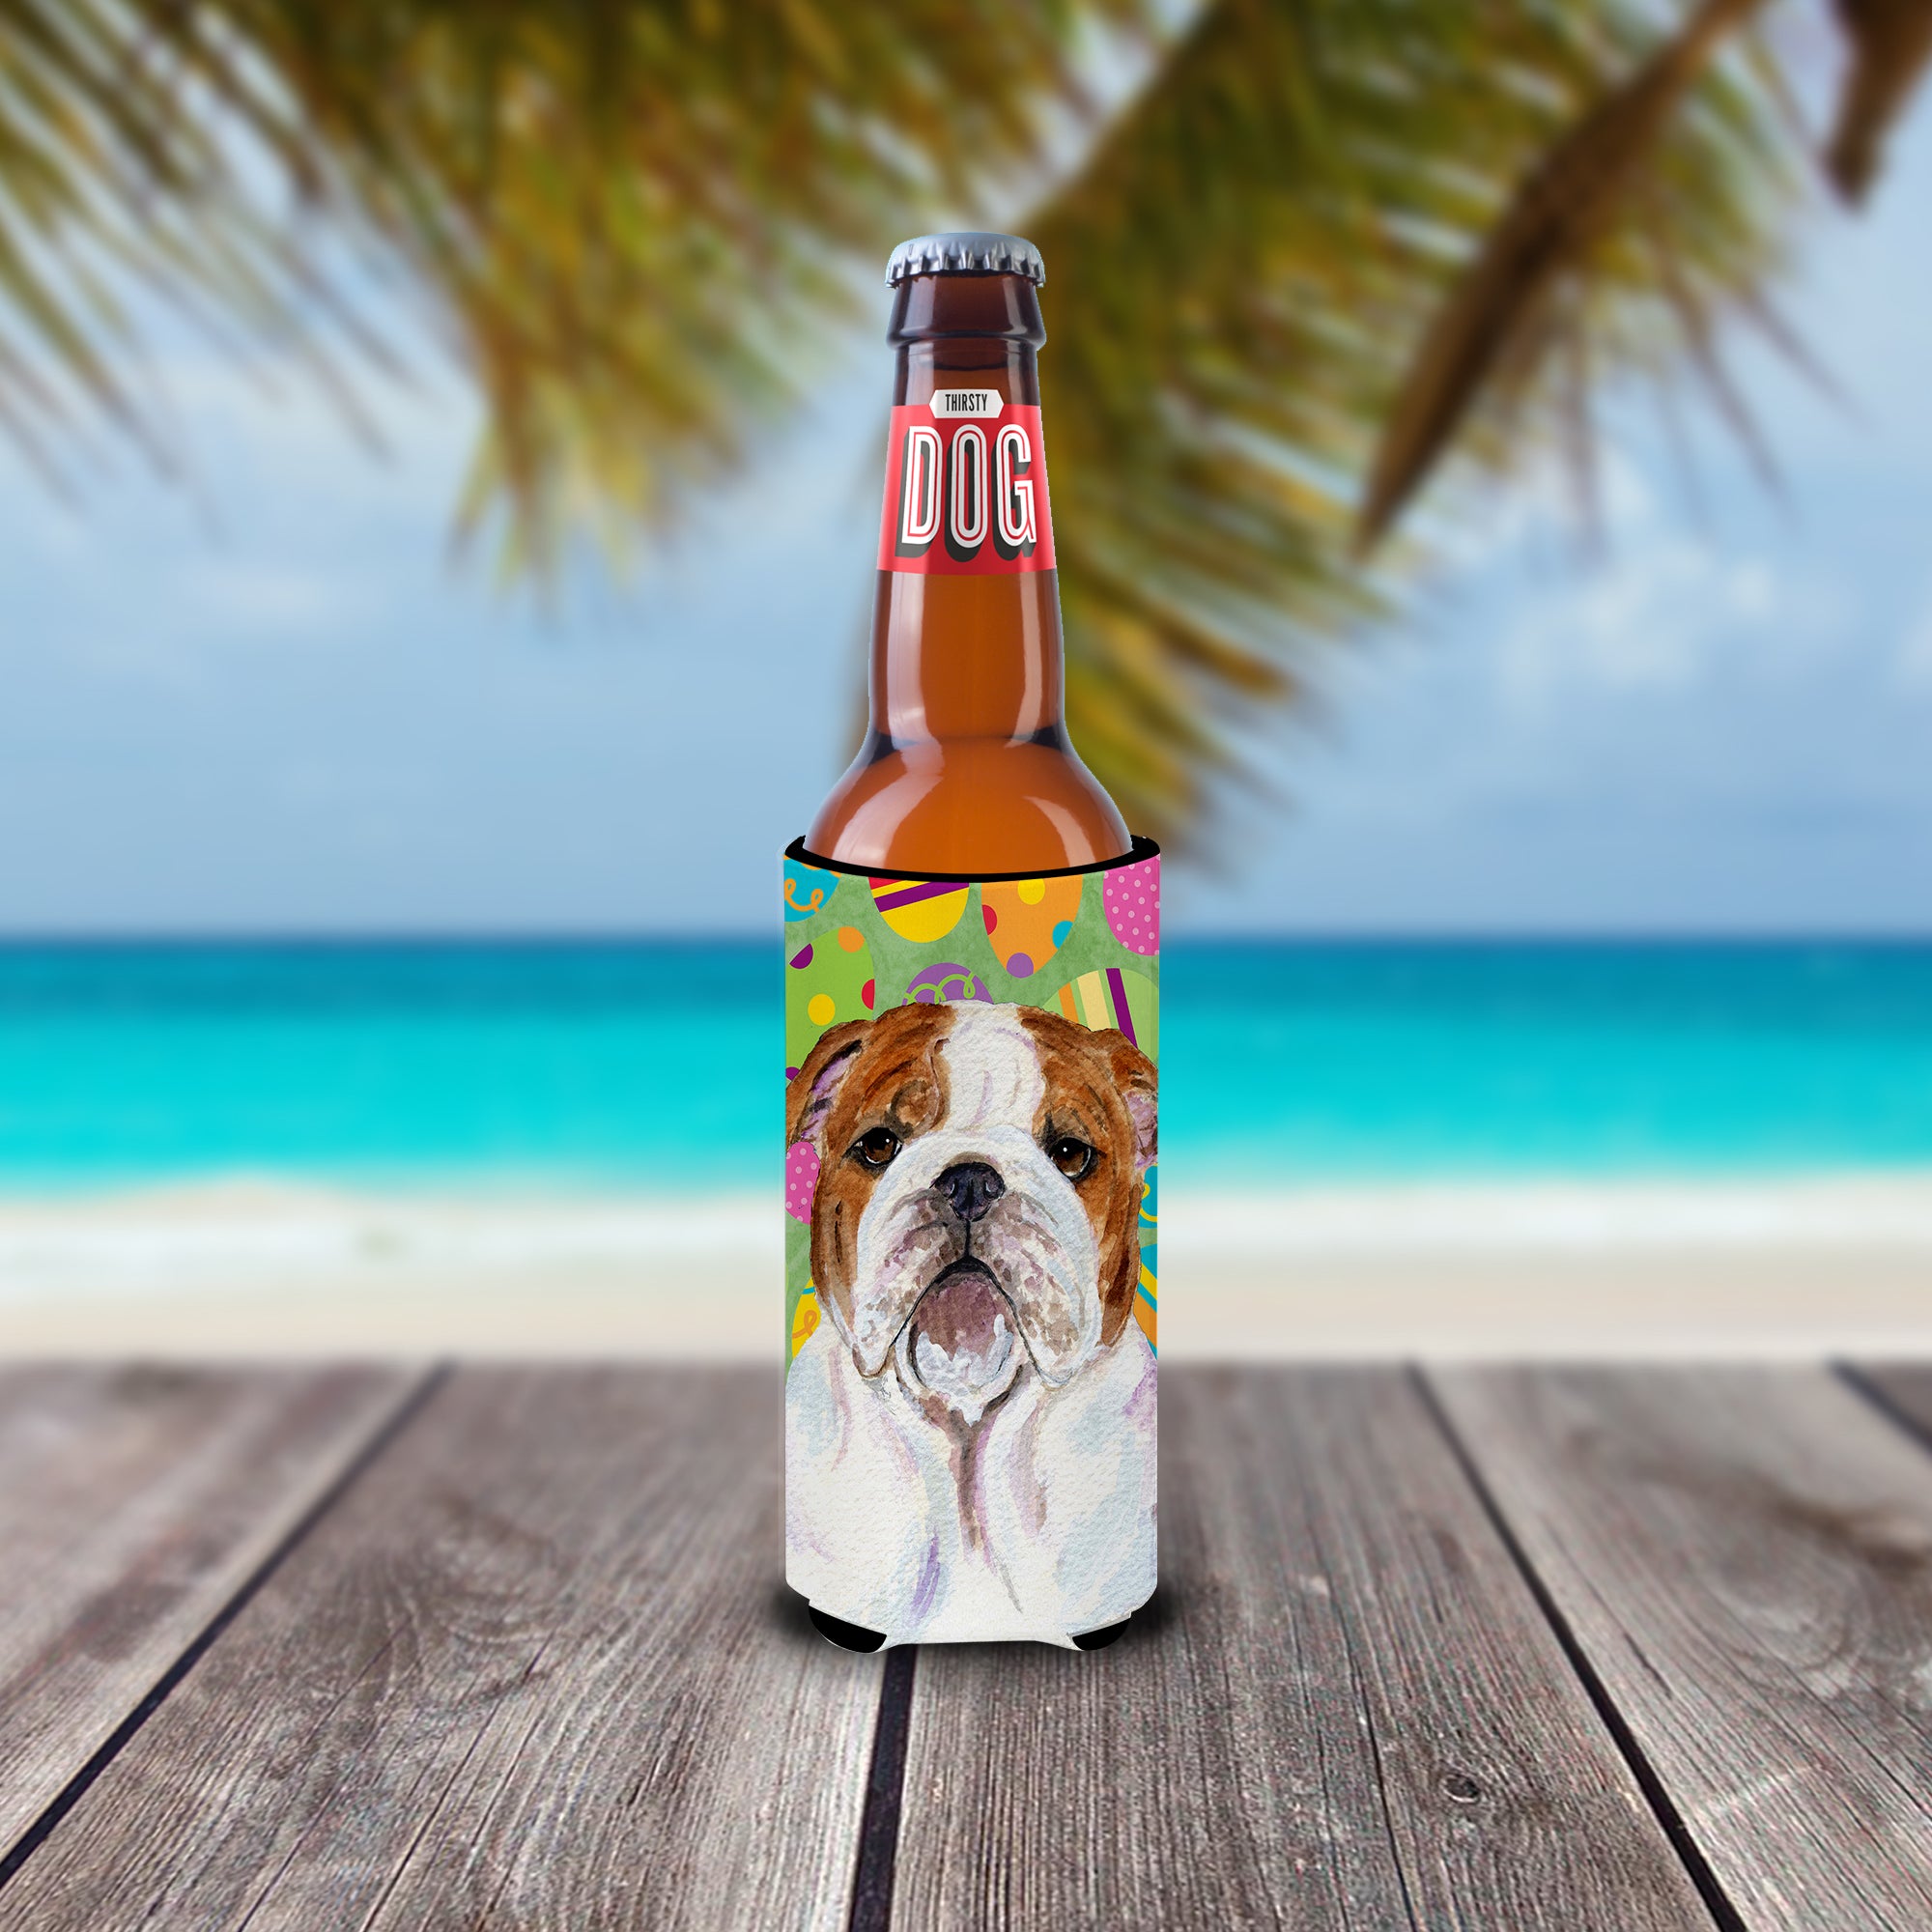 Bulldog English Easter Eggtravaganza Ultra Beverage Isolateurs pour canettes minces SS4829MUK